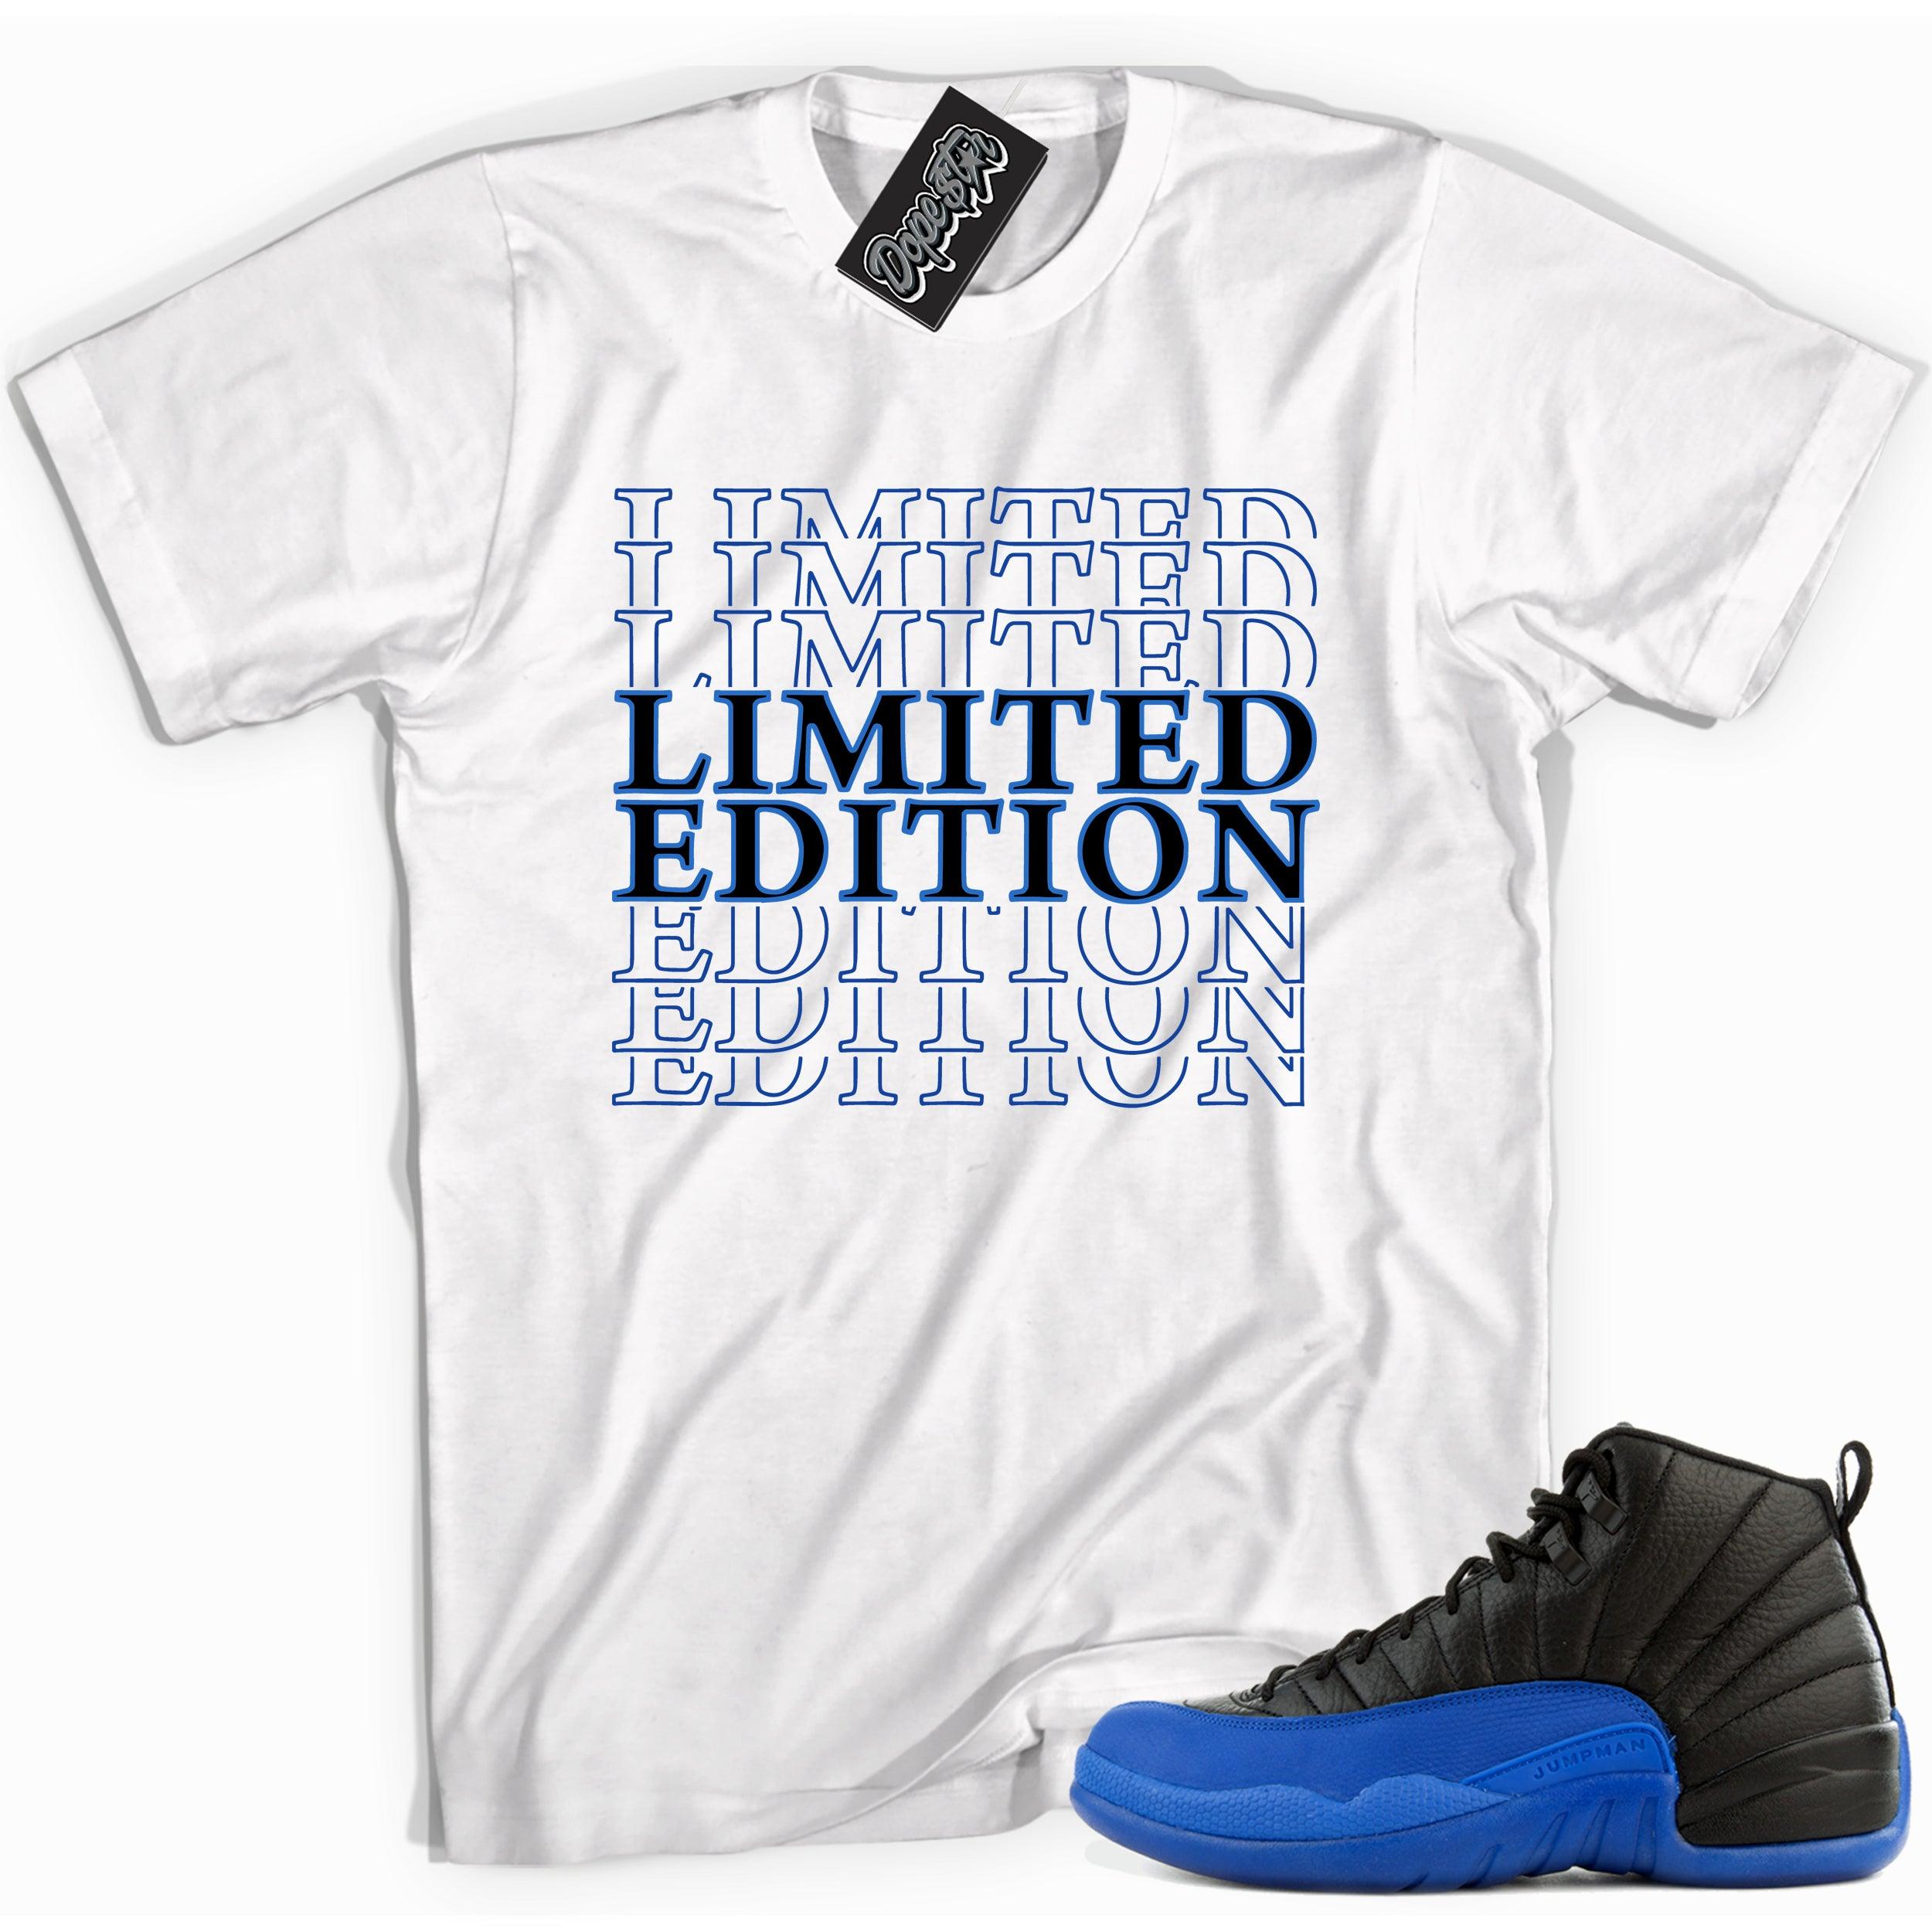 Cool white graphic tee with 'limited edition' print, that perfectly matches Air Jordan 12 Retro Black Game Royal sneakers.